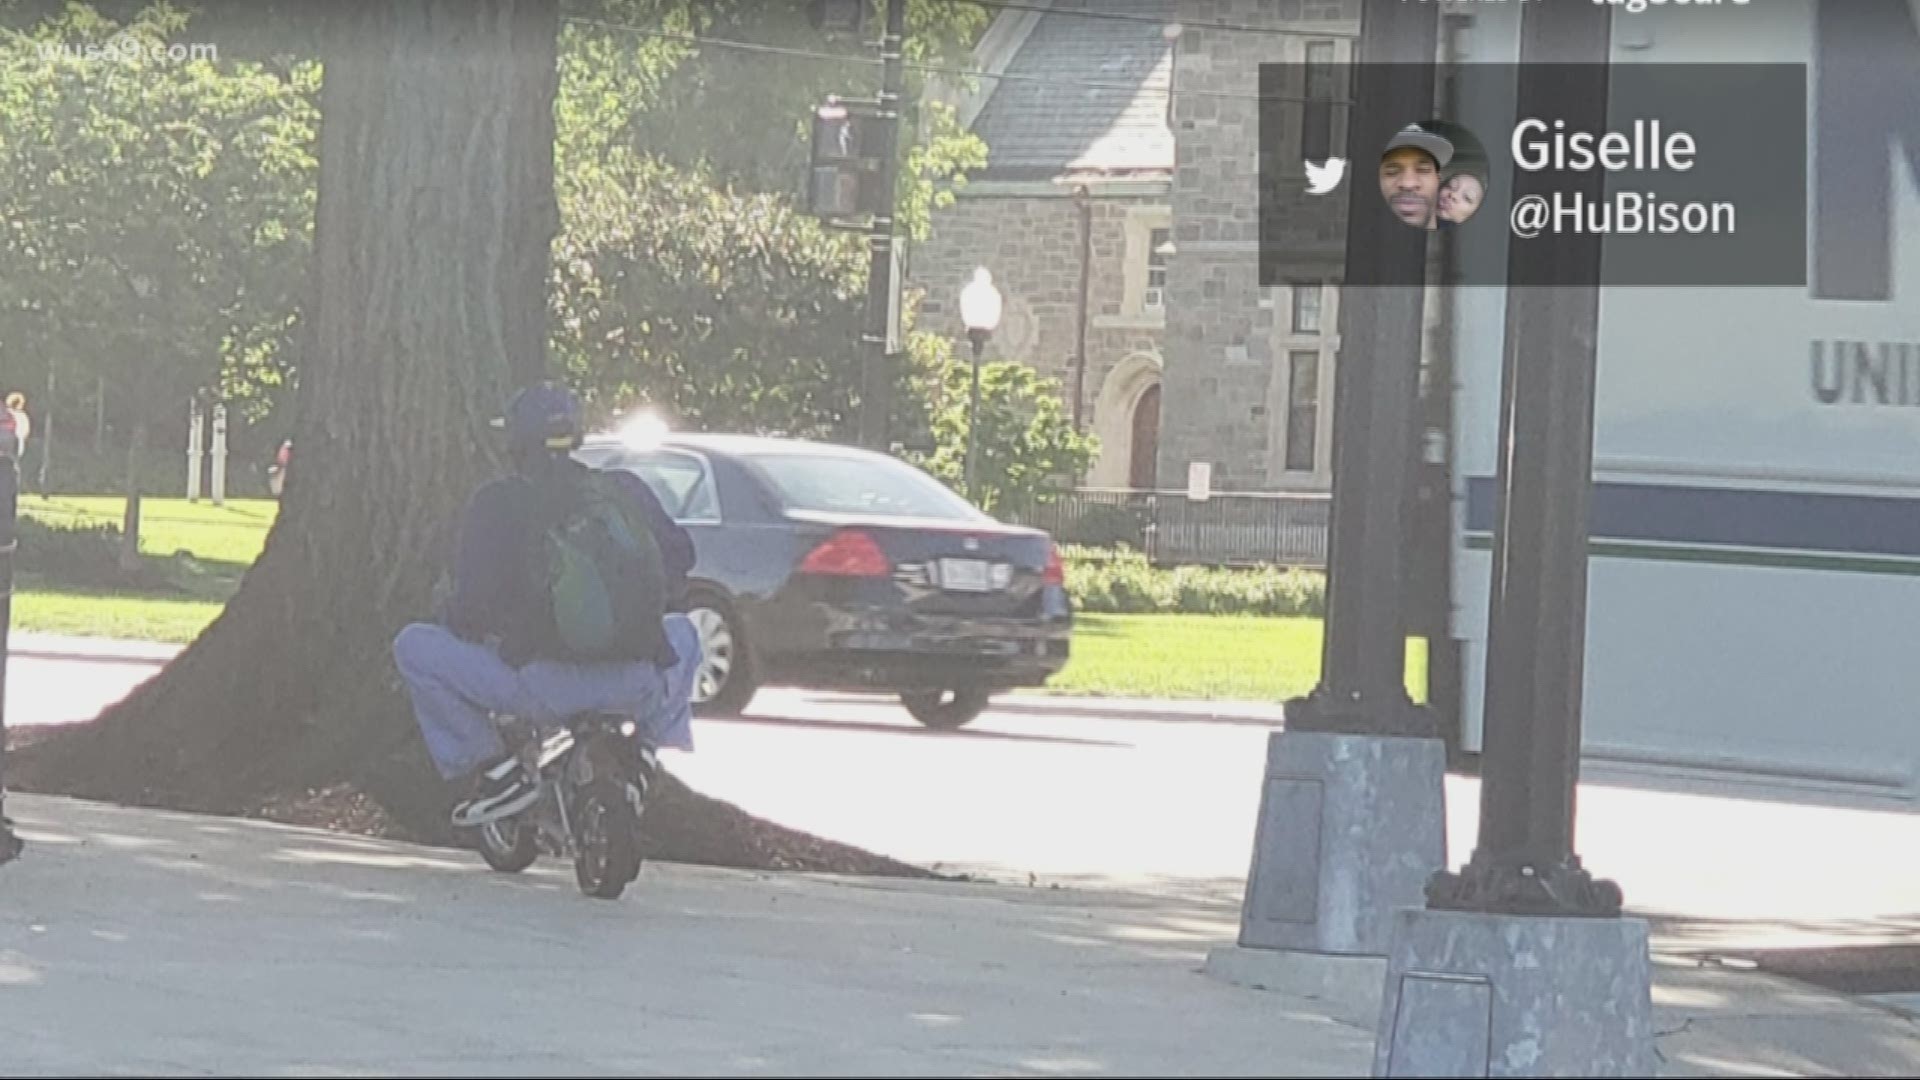 This is funny for many reasons. 
The first being that the back tire is holding on for dear life. 
Reese Waters doesn't want to go too far, because this man may identify as being tiny. 
In his mind this bike could be his size.